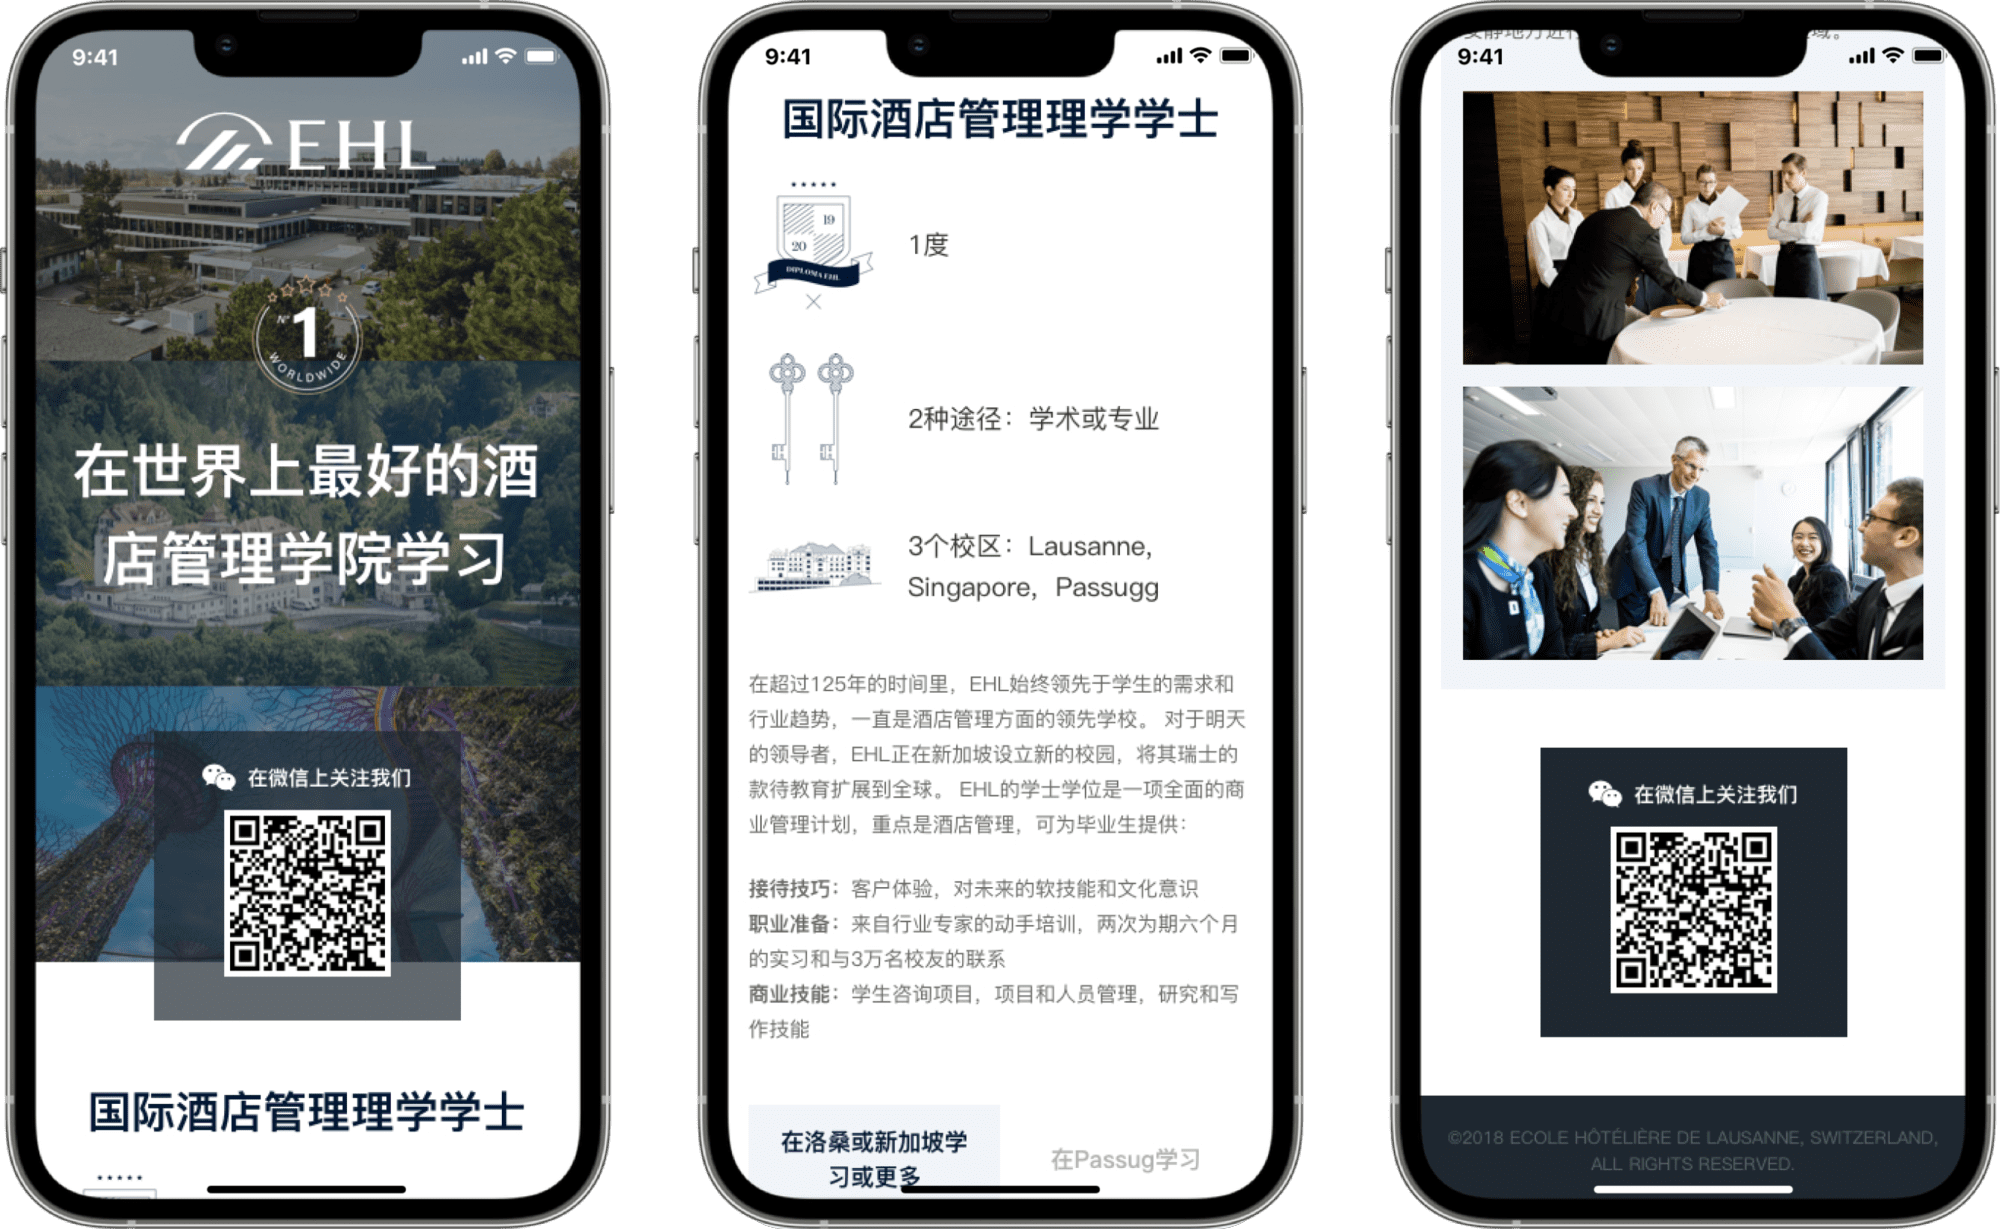 The Landing Page of the EHL WeChat Official Account designed and set up by IT Consultis